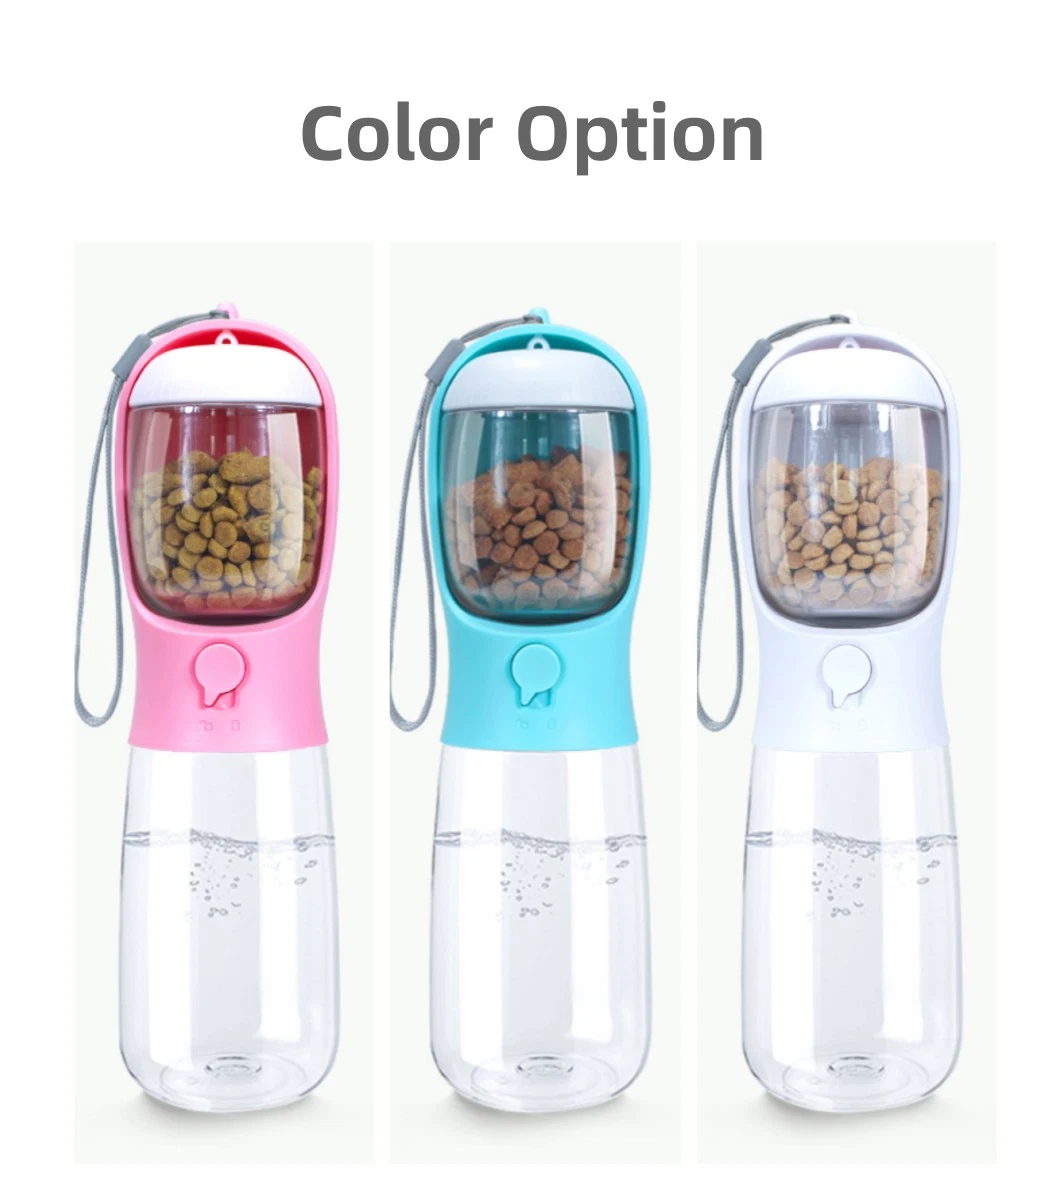 Drink and Food Feeder with PEE Box Outdoor Pet Bottle